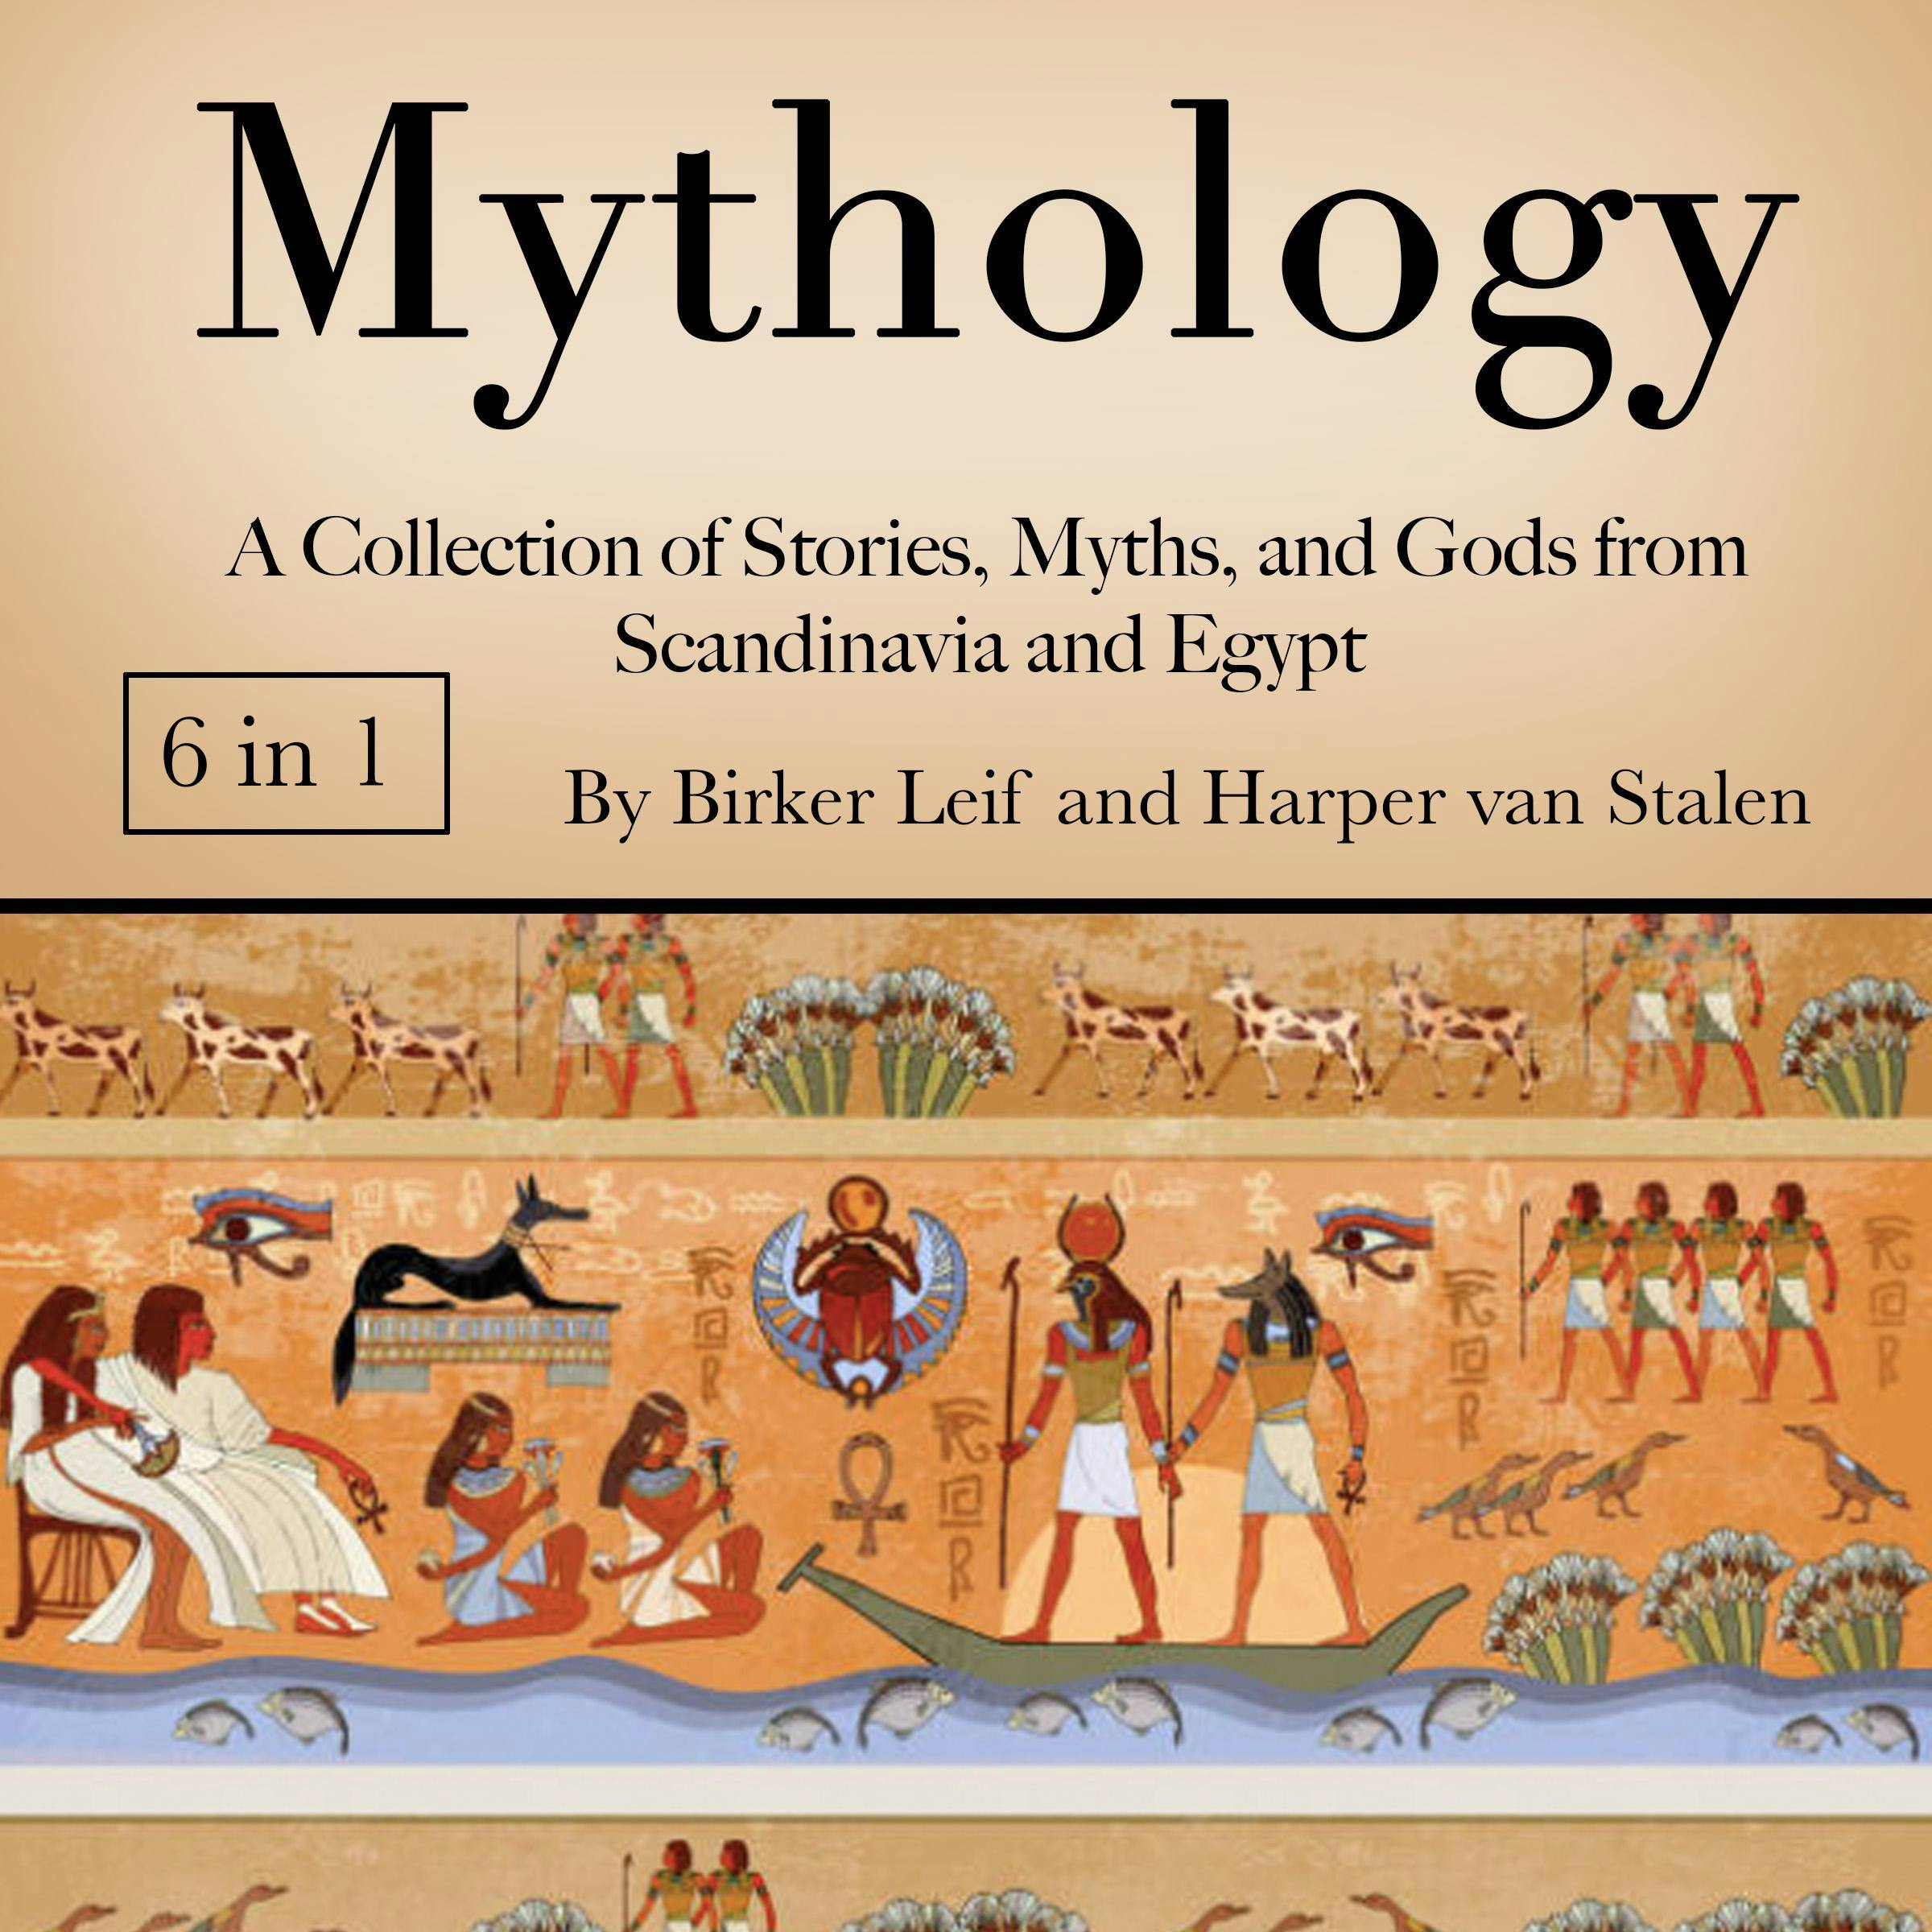 Mythology: A Collection of Stories, Myths, and Gods from Scandinavia and Egypt - Birker Leif, Harper van Stalen